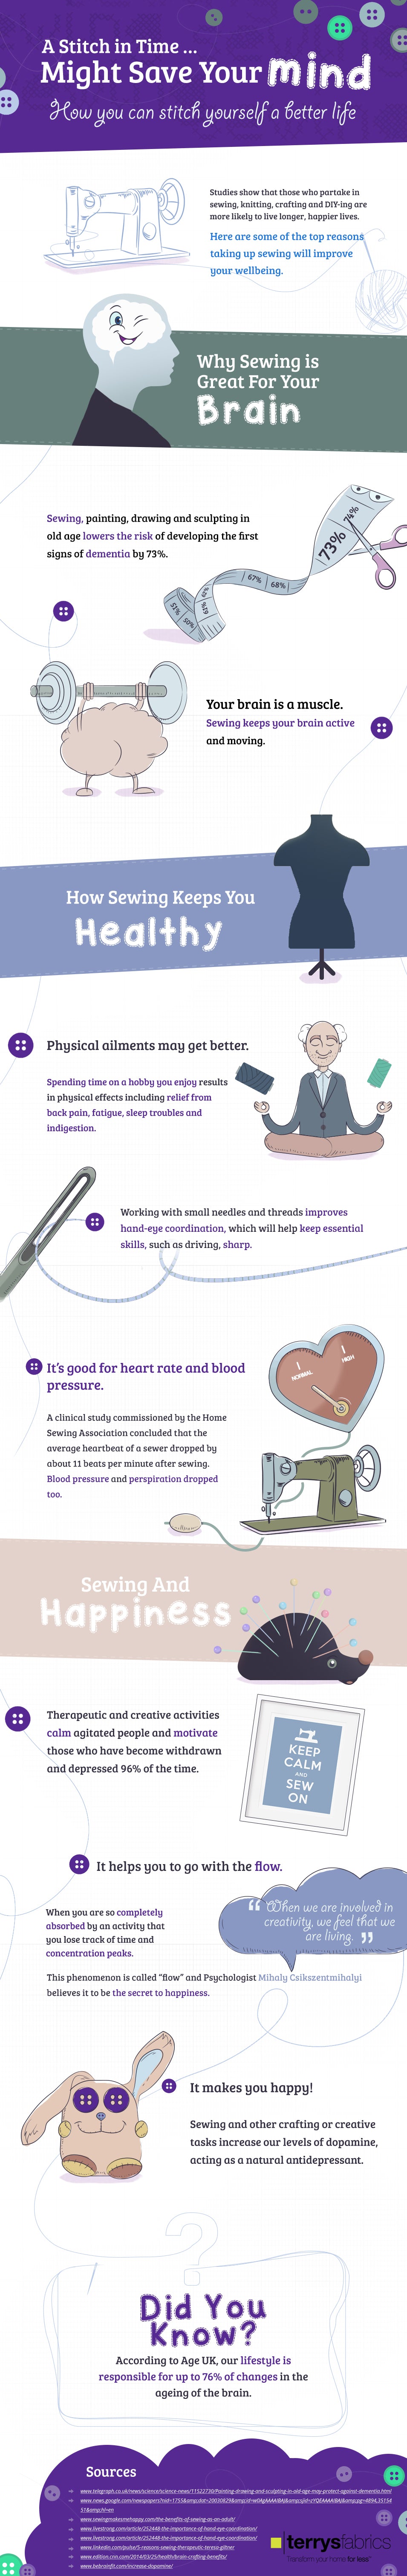 Health Benefits Of Sewing